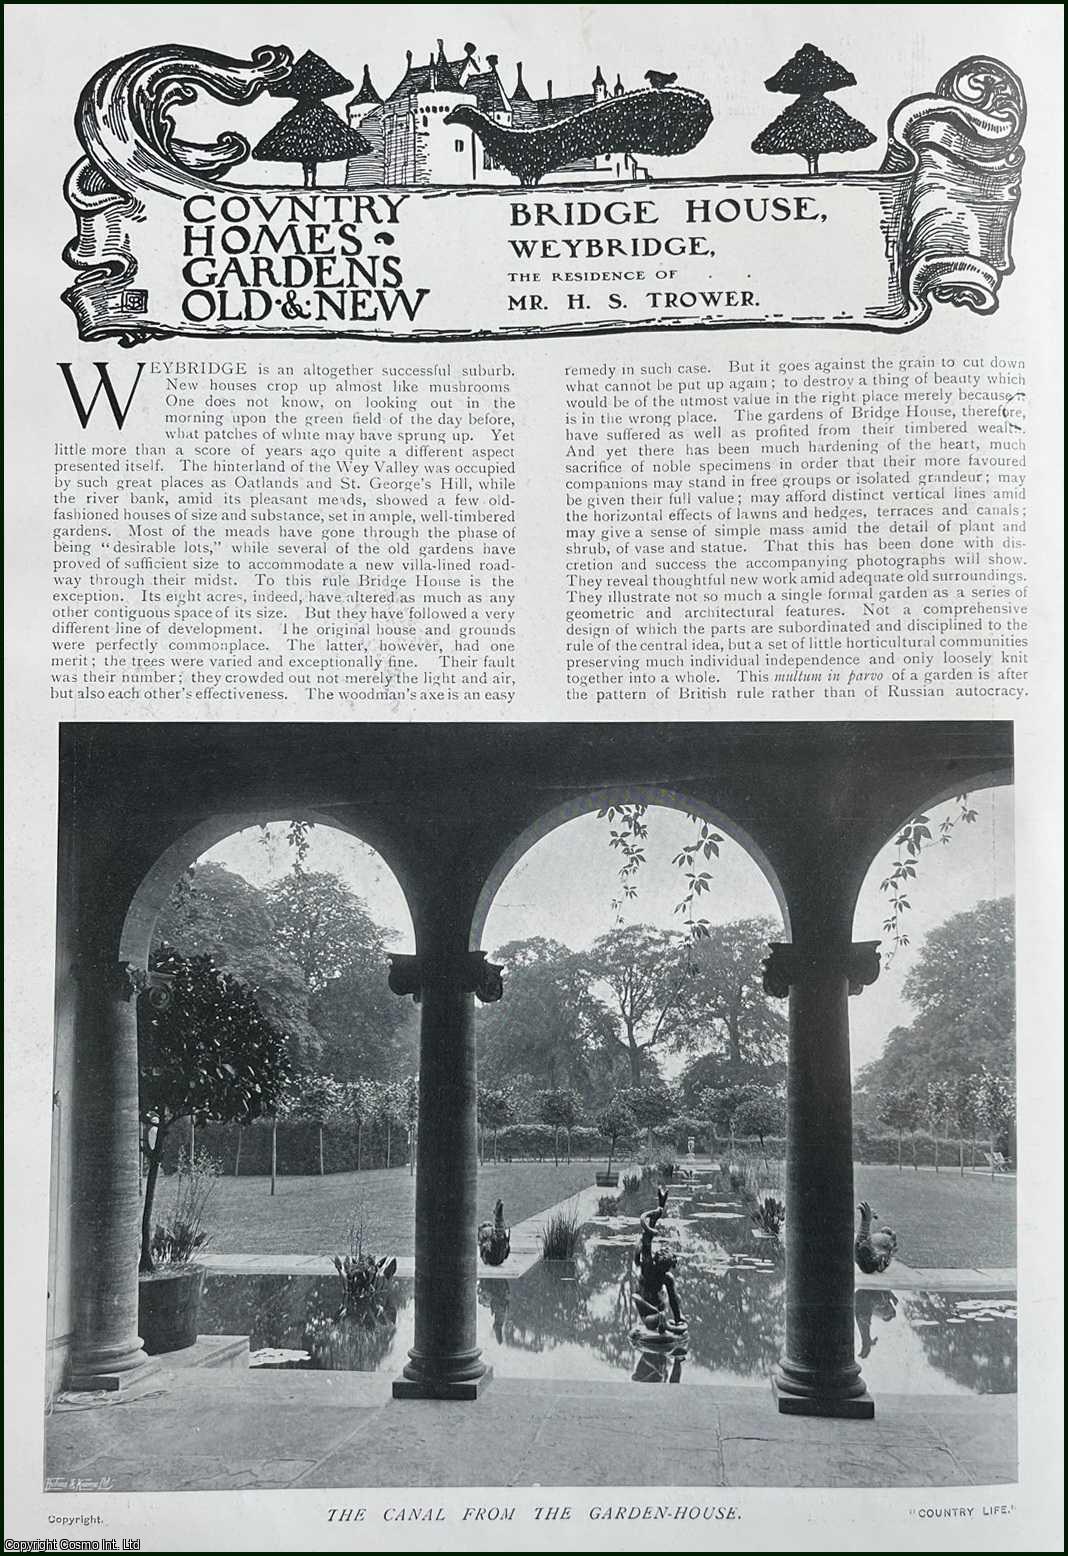 Country Life Magazine - Bridge House, Weybridge. Several pictures and accompanying text, removed from an original issue of Country Life Magazine, 1908.